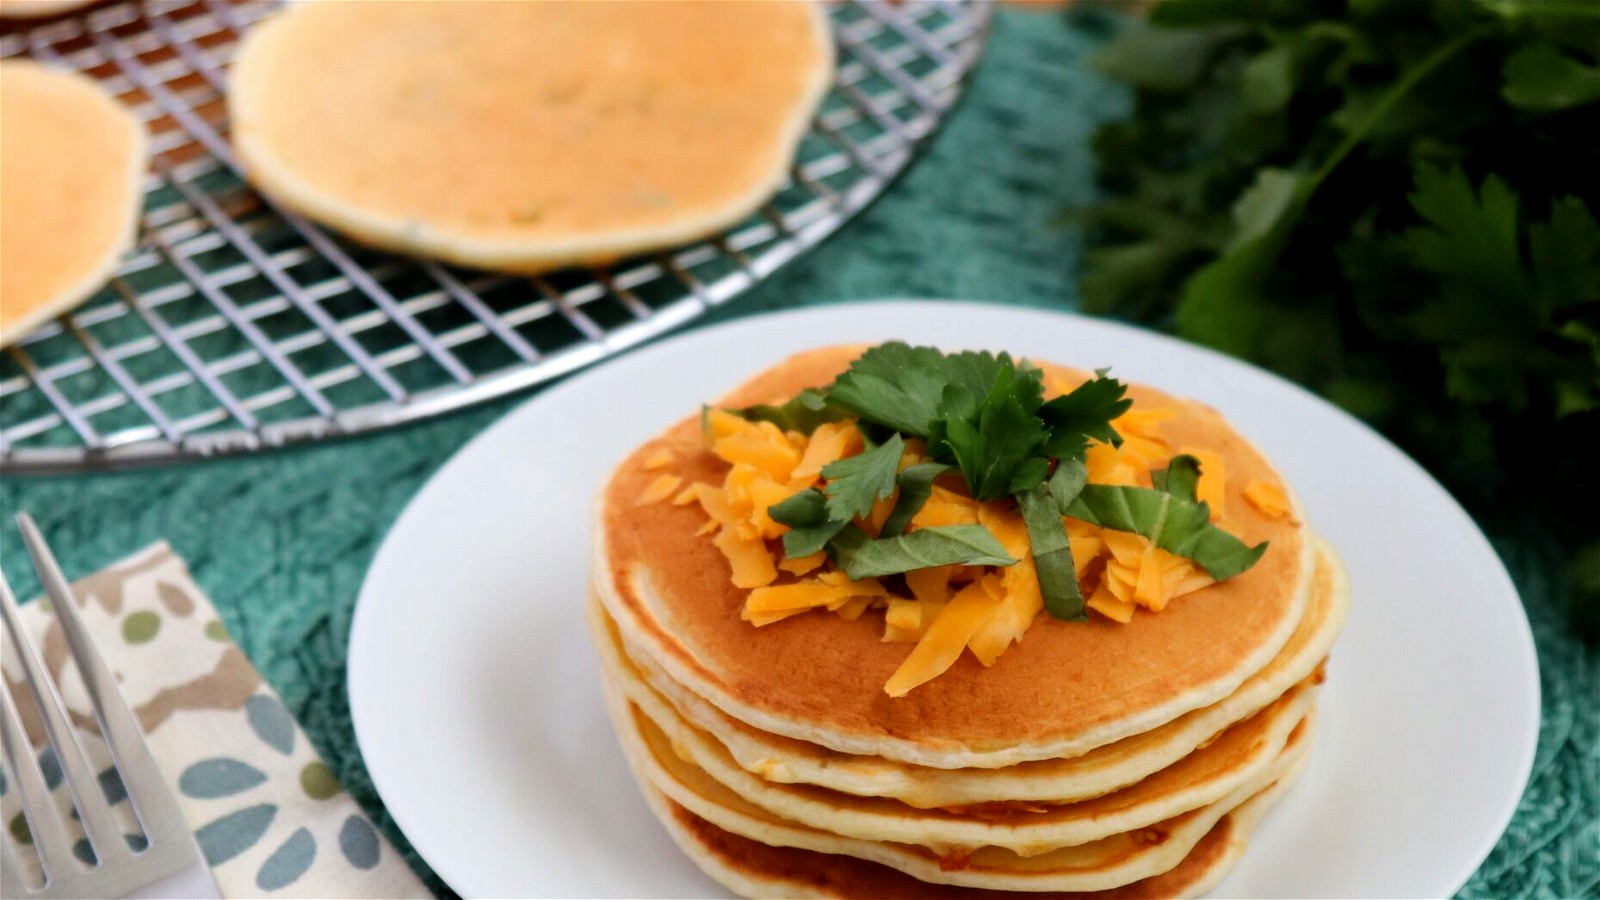 Image of Cheese and Herb Pikelets